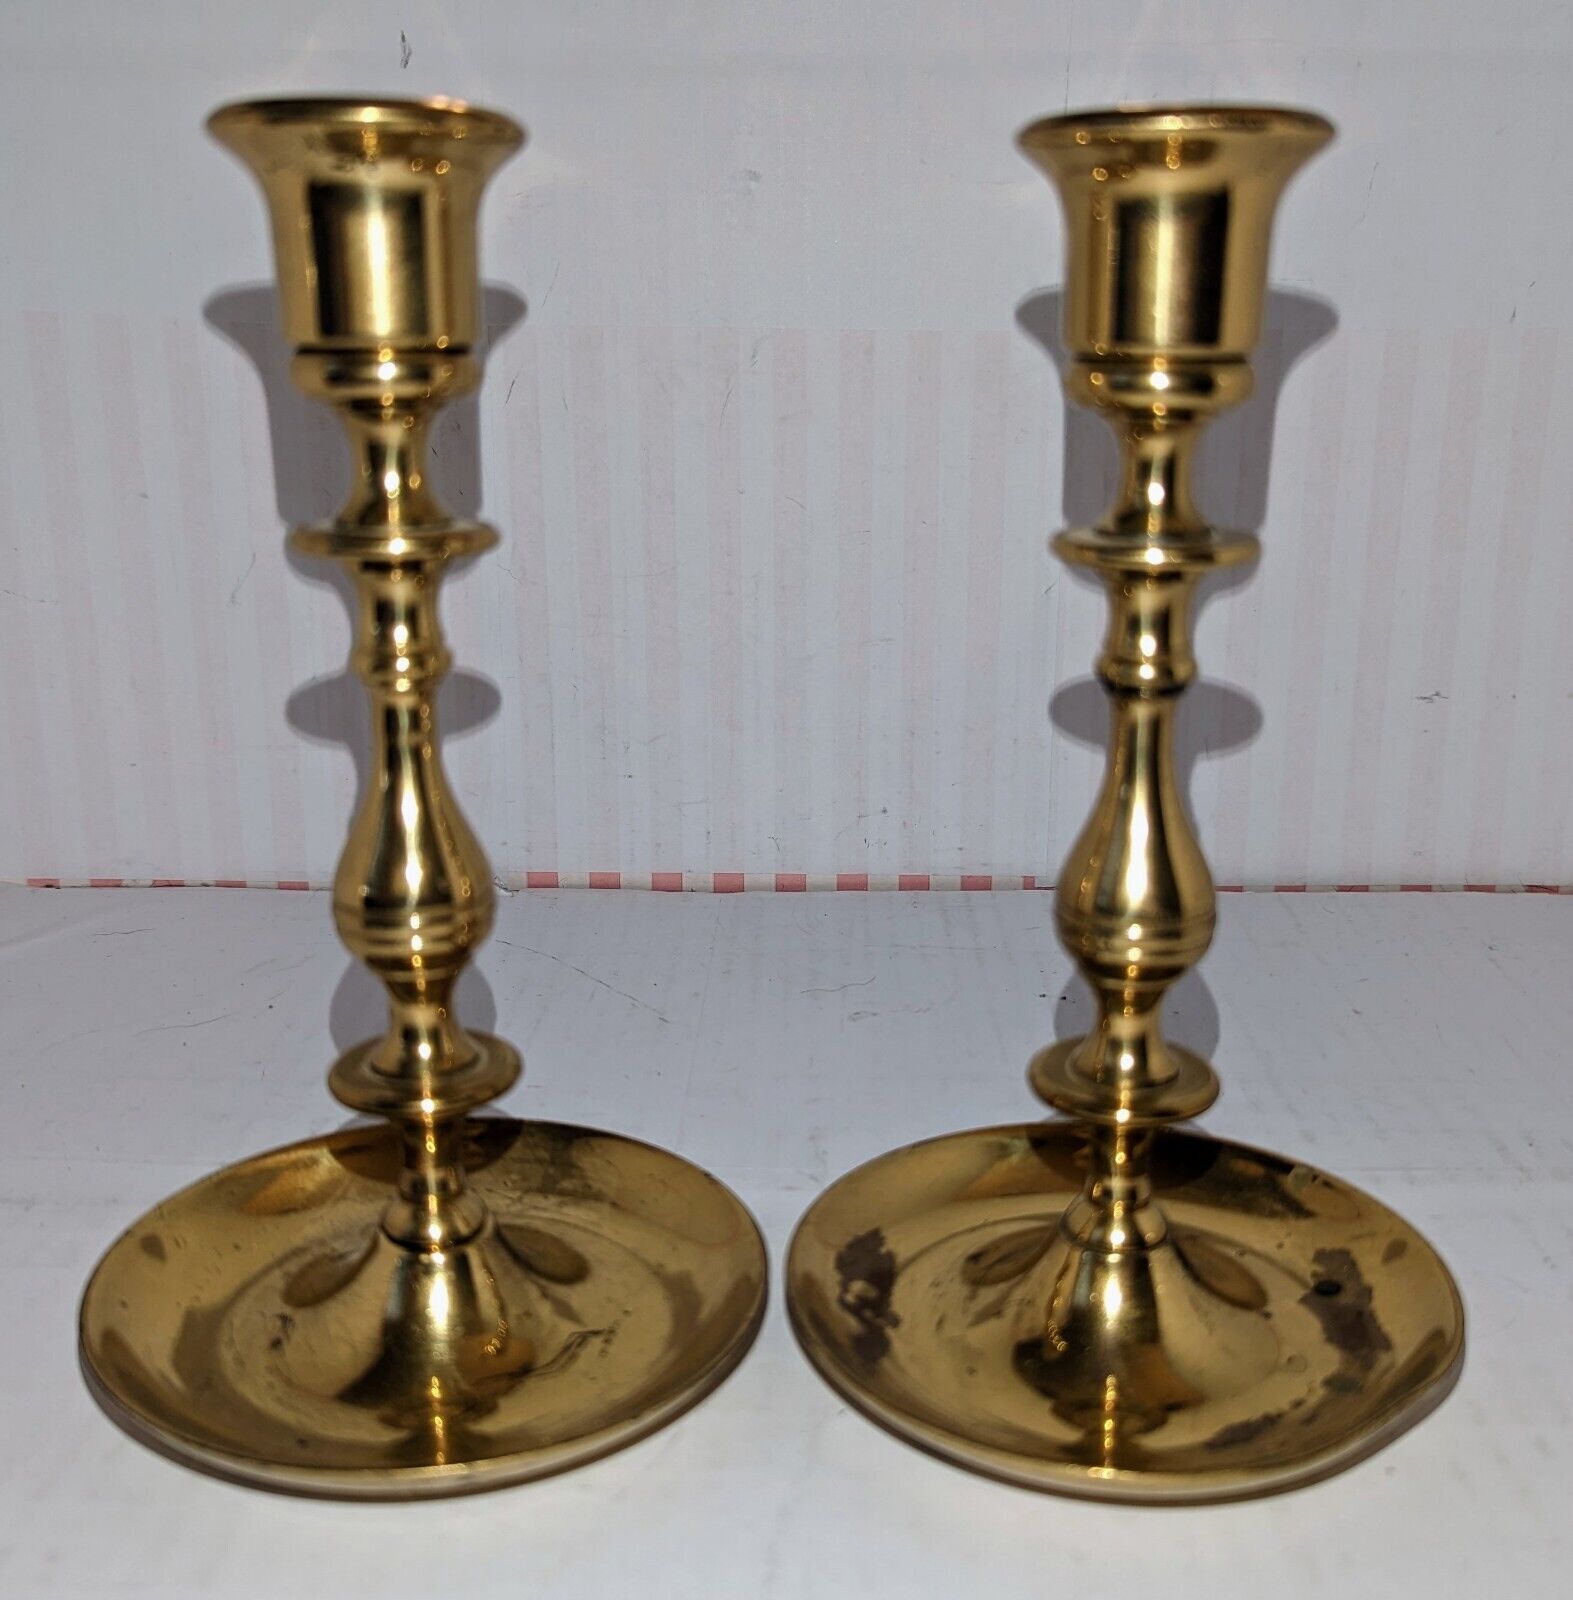 Brass Candlesticks Vtg  Classic Pair of Marked with an M. Heavy Good Condition🕯